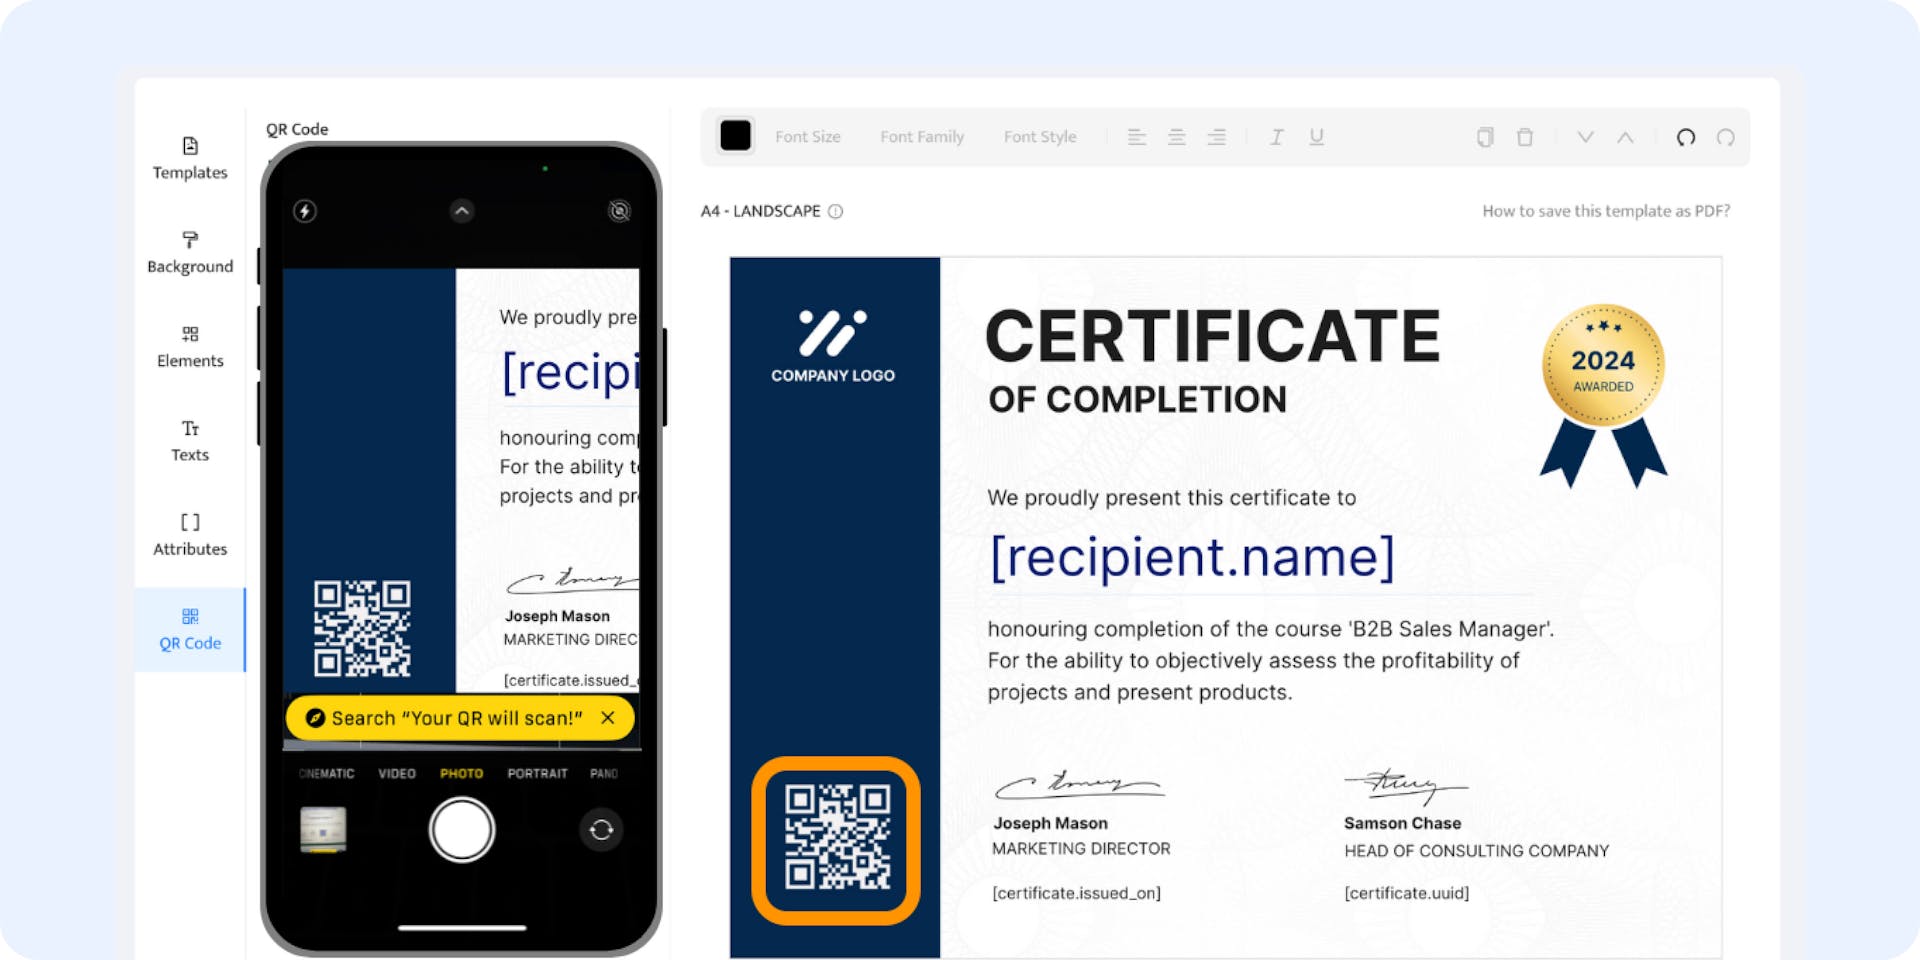 Scanning the QR code on the certificate that leads to the verification page.